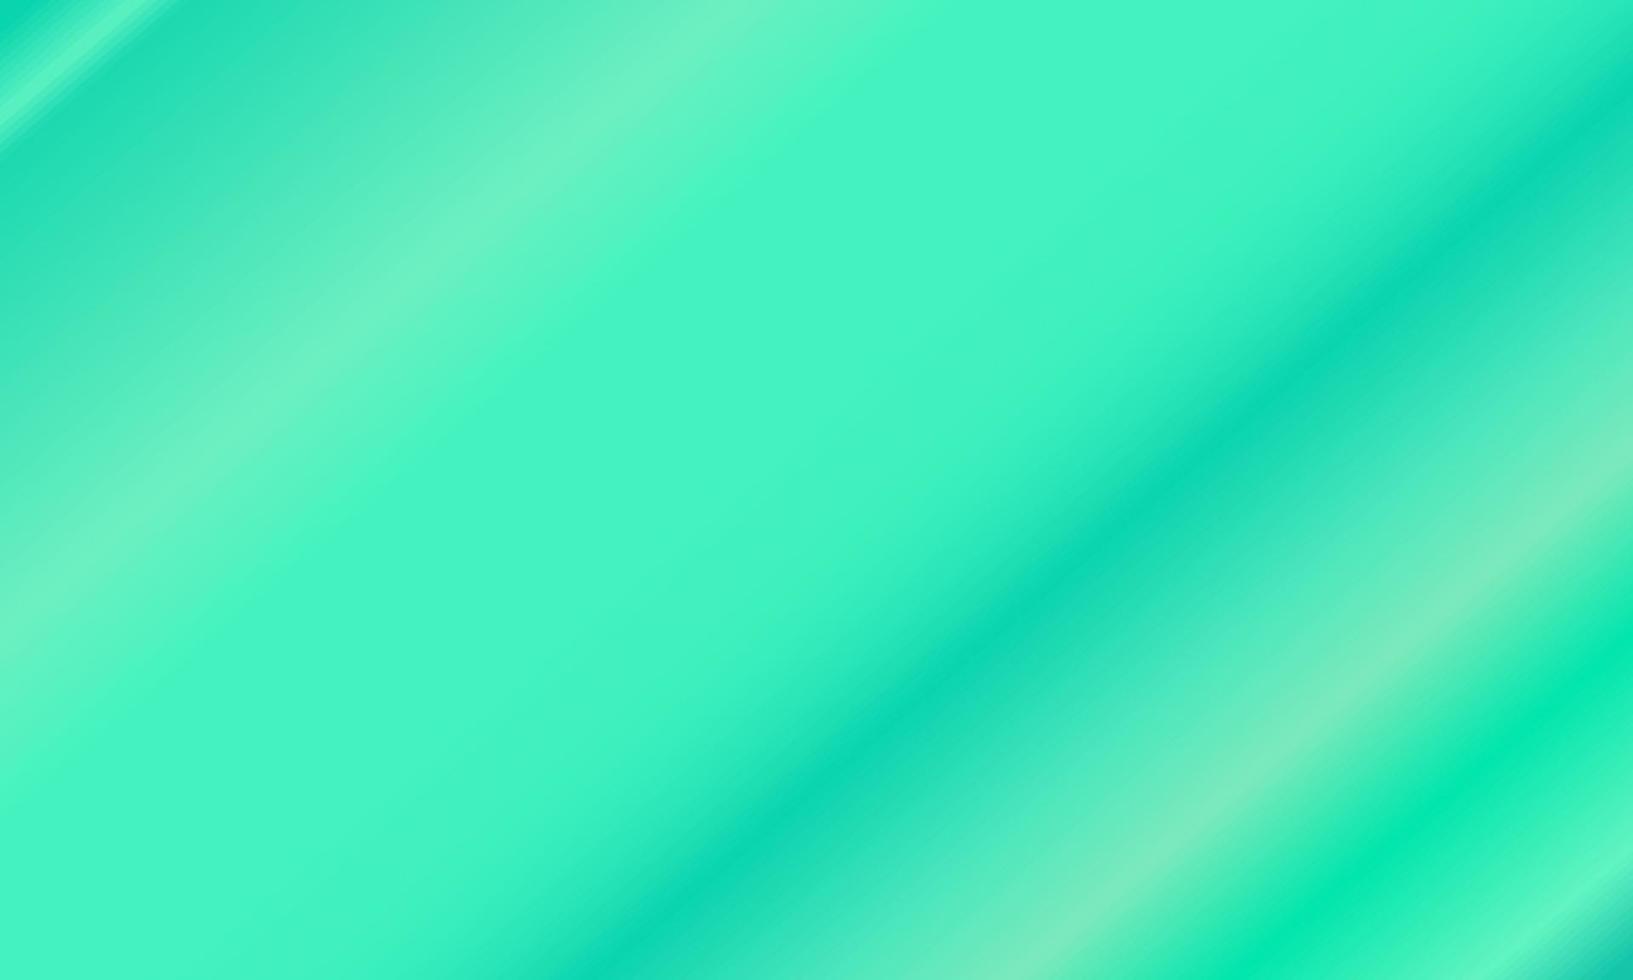 tosca green and white diagonal gradient. abstract, simple, modern and color style. great for background, wallpaper, card, cover, poster, banner or flyer vector